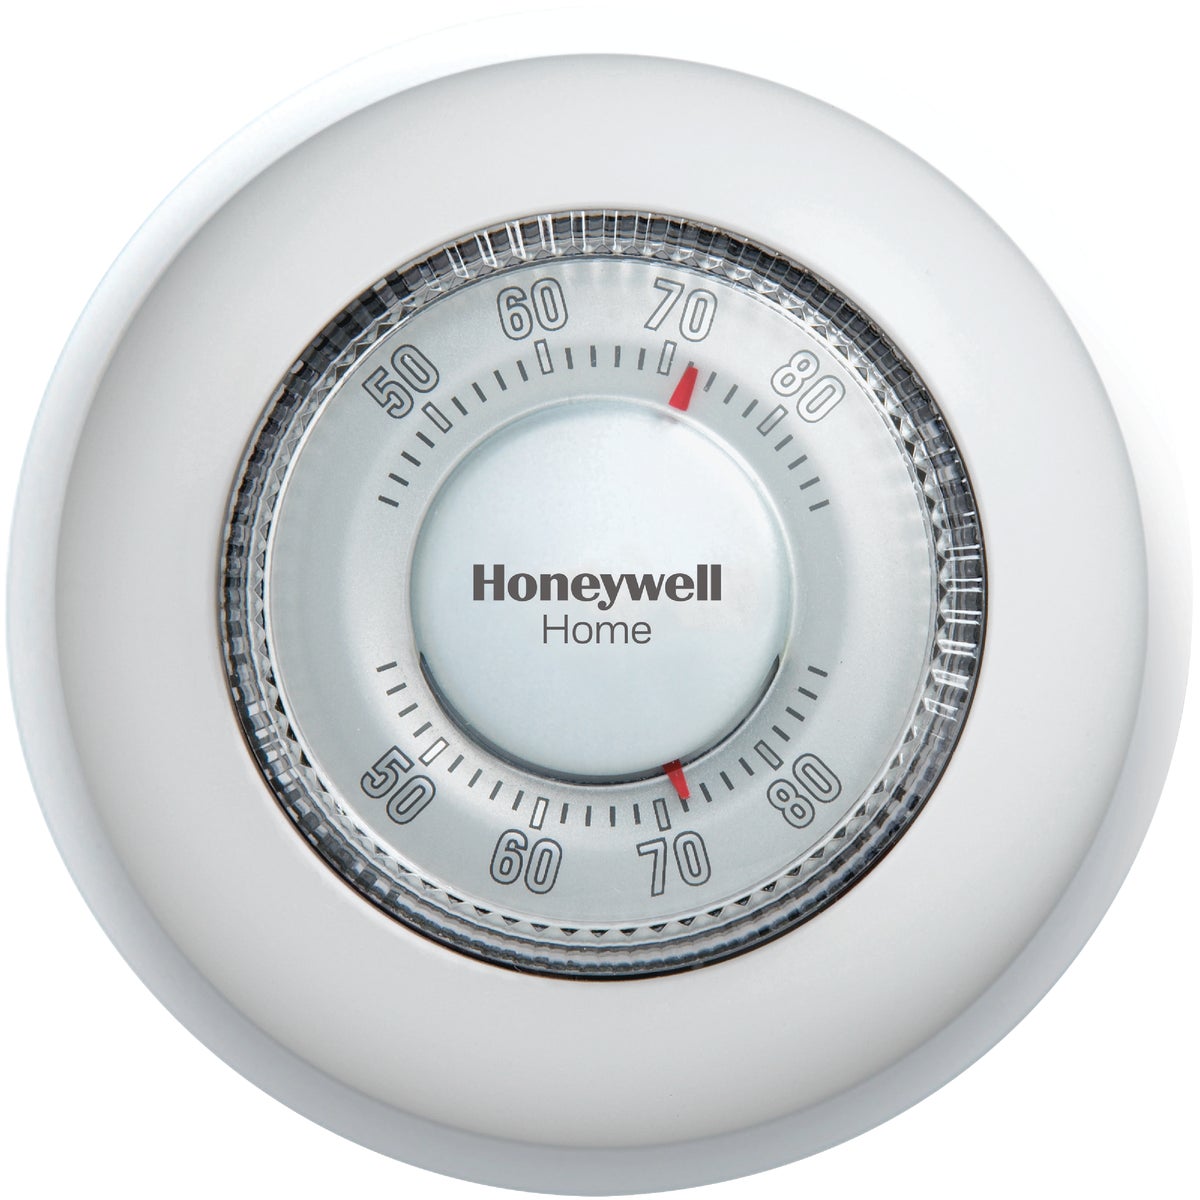 Honeywell Home Heat Only Off White Round Wall Thermostat